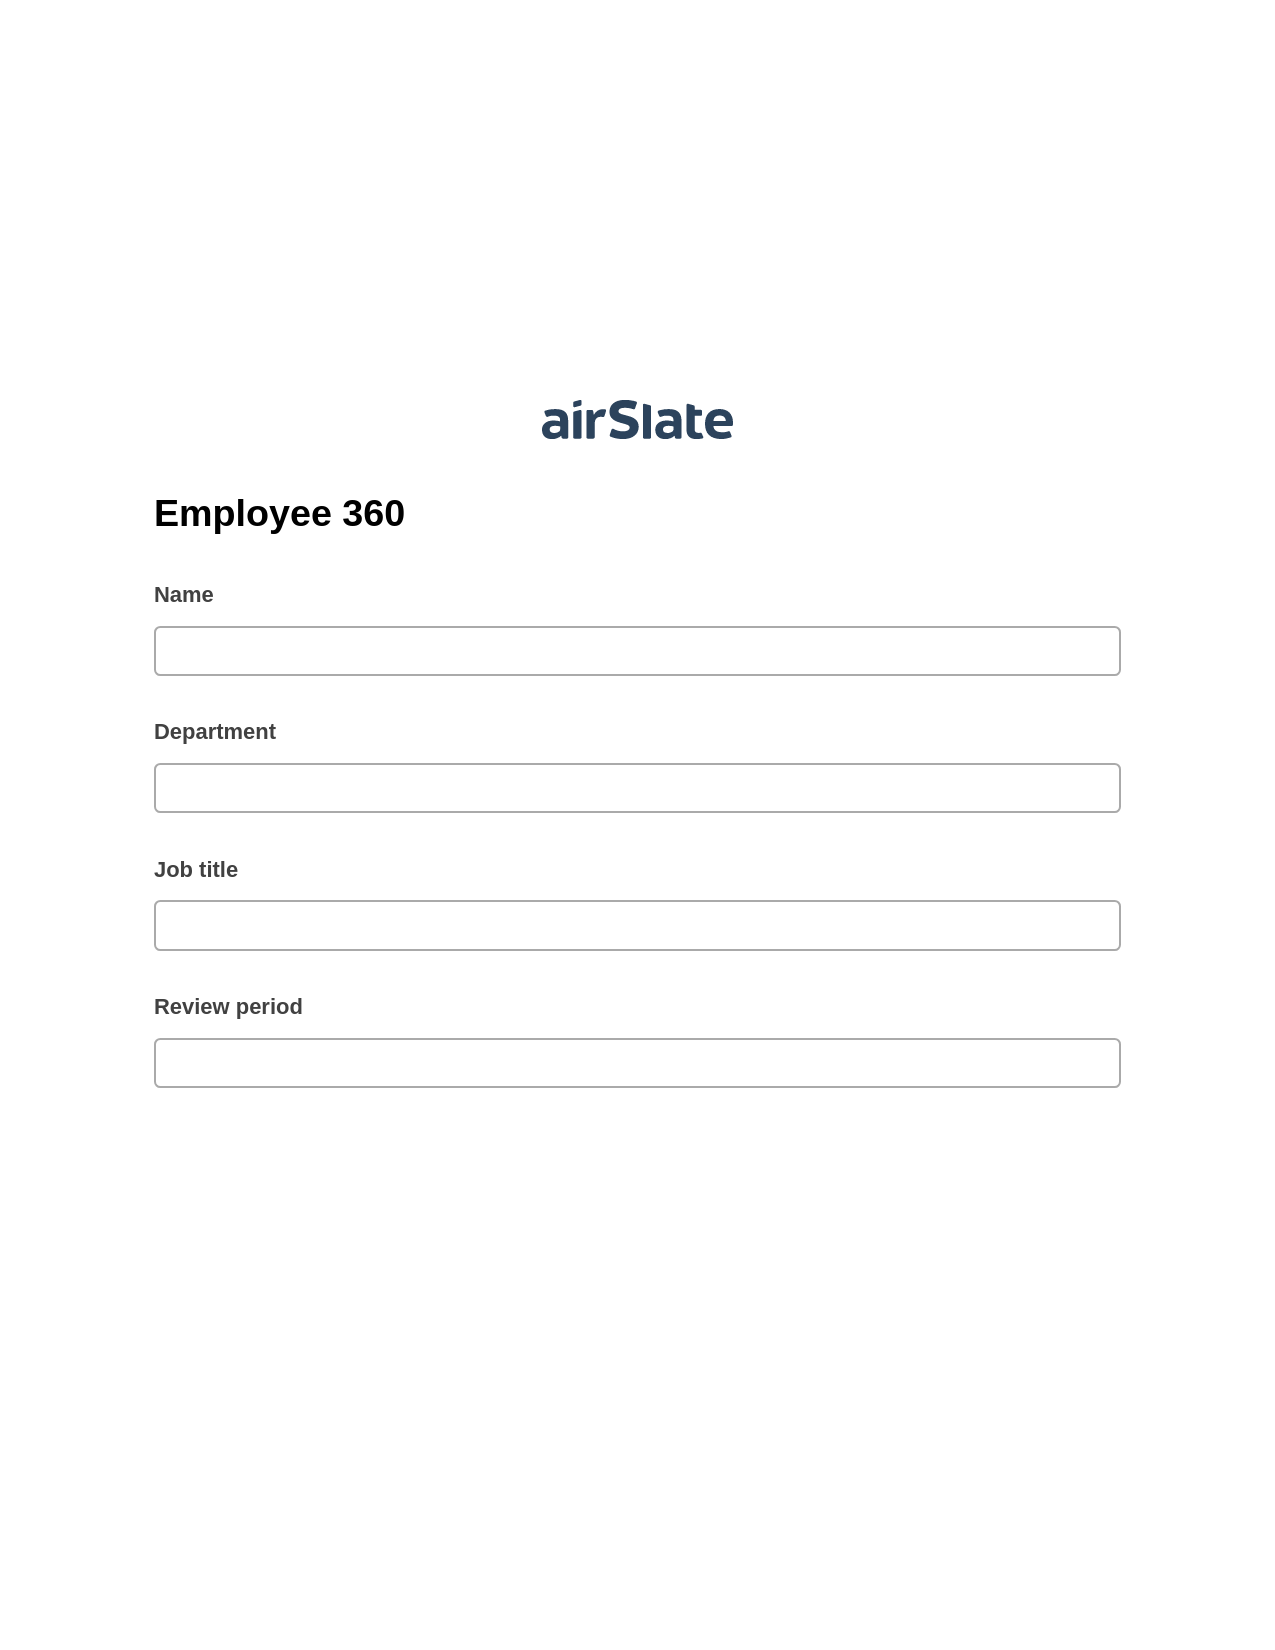 Employee 360 Pre-fill from CSV File Bot, Create MS Dynamics 365 Records Bot, Email Notification Postfinish Bot